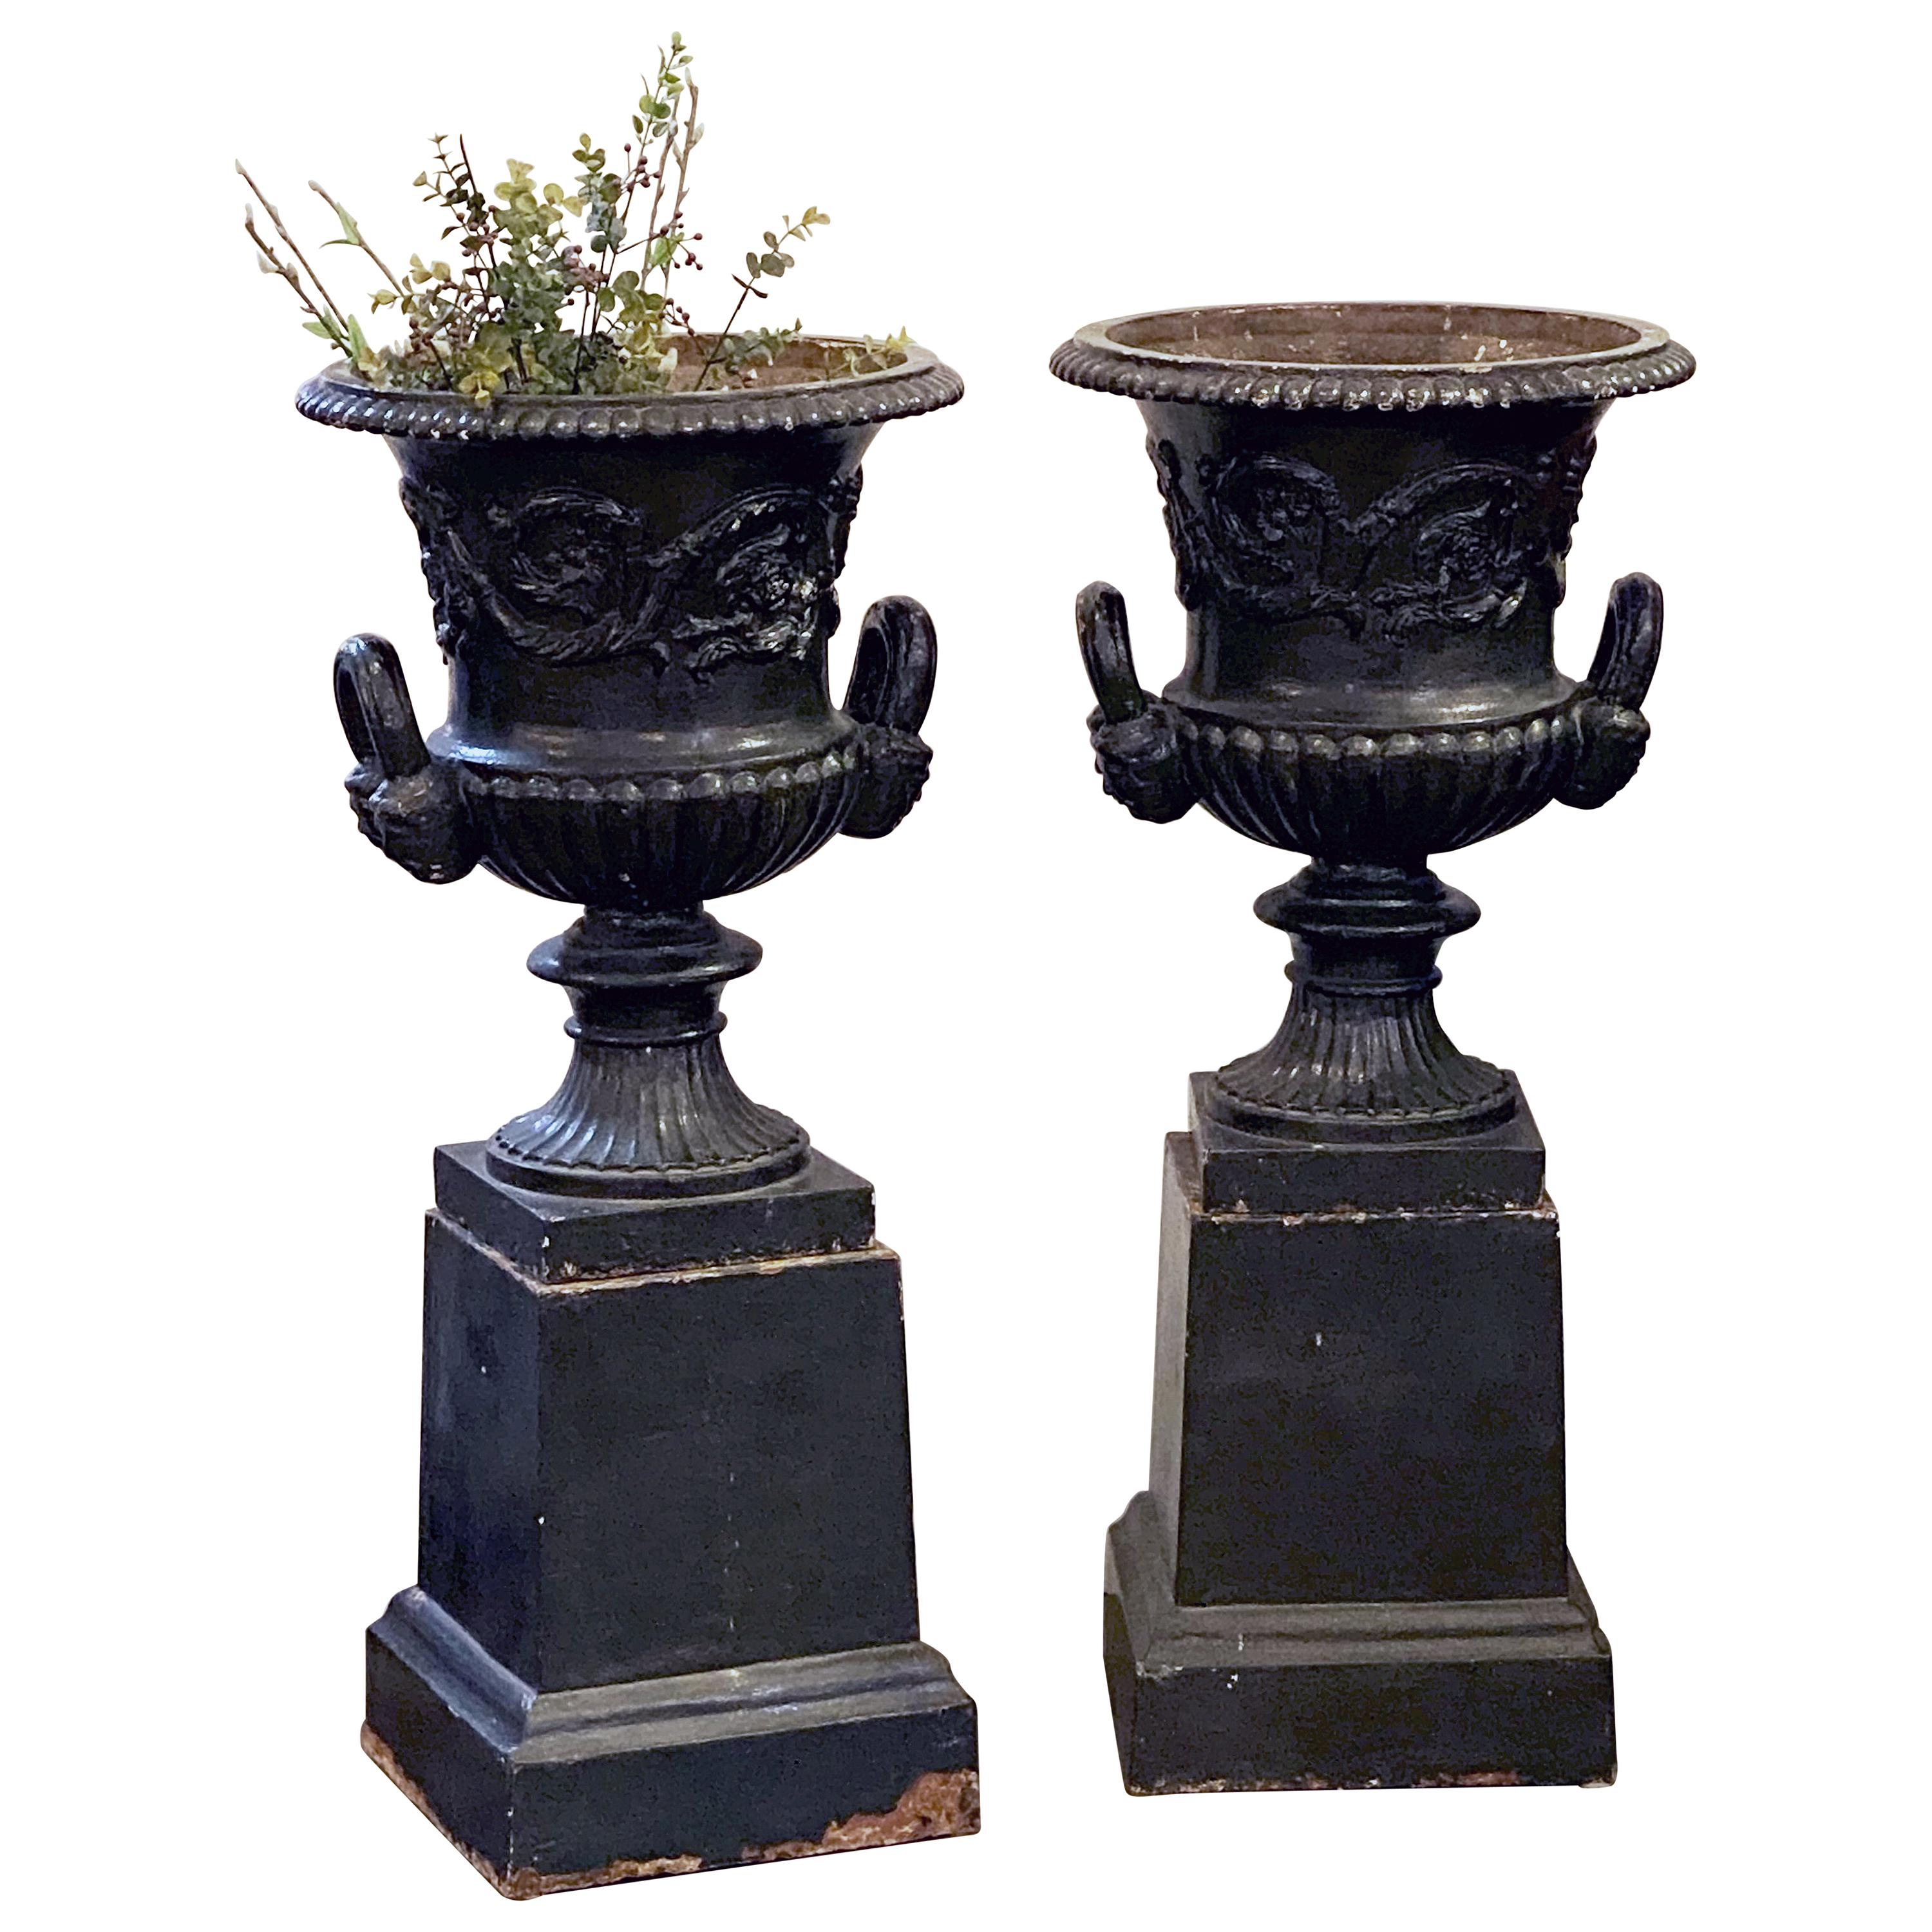 English Cast Iron Urns on Plinths from the Regency Era, Individually Priced